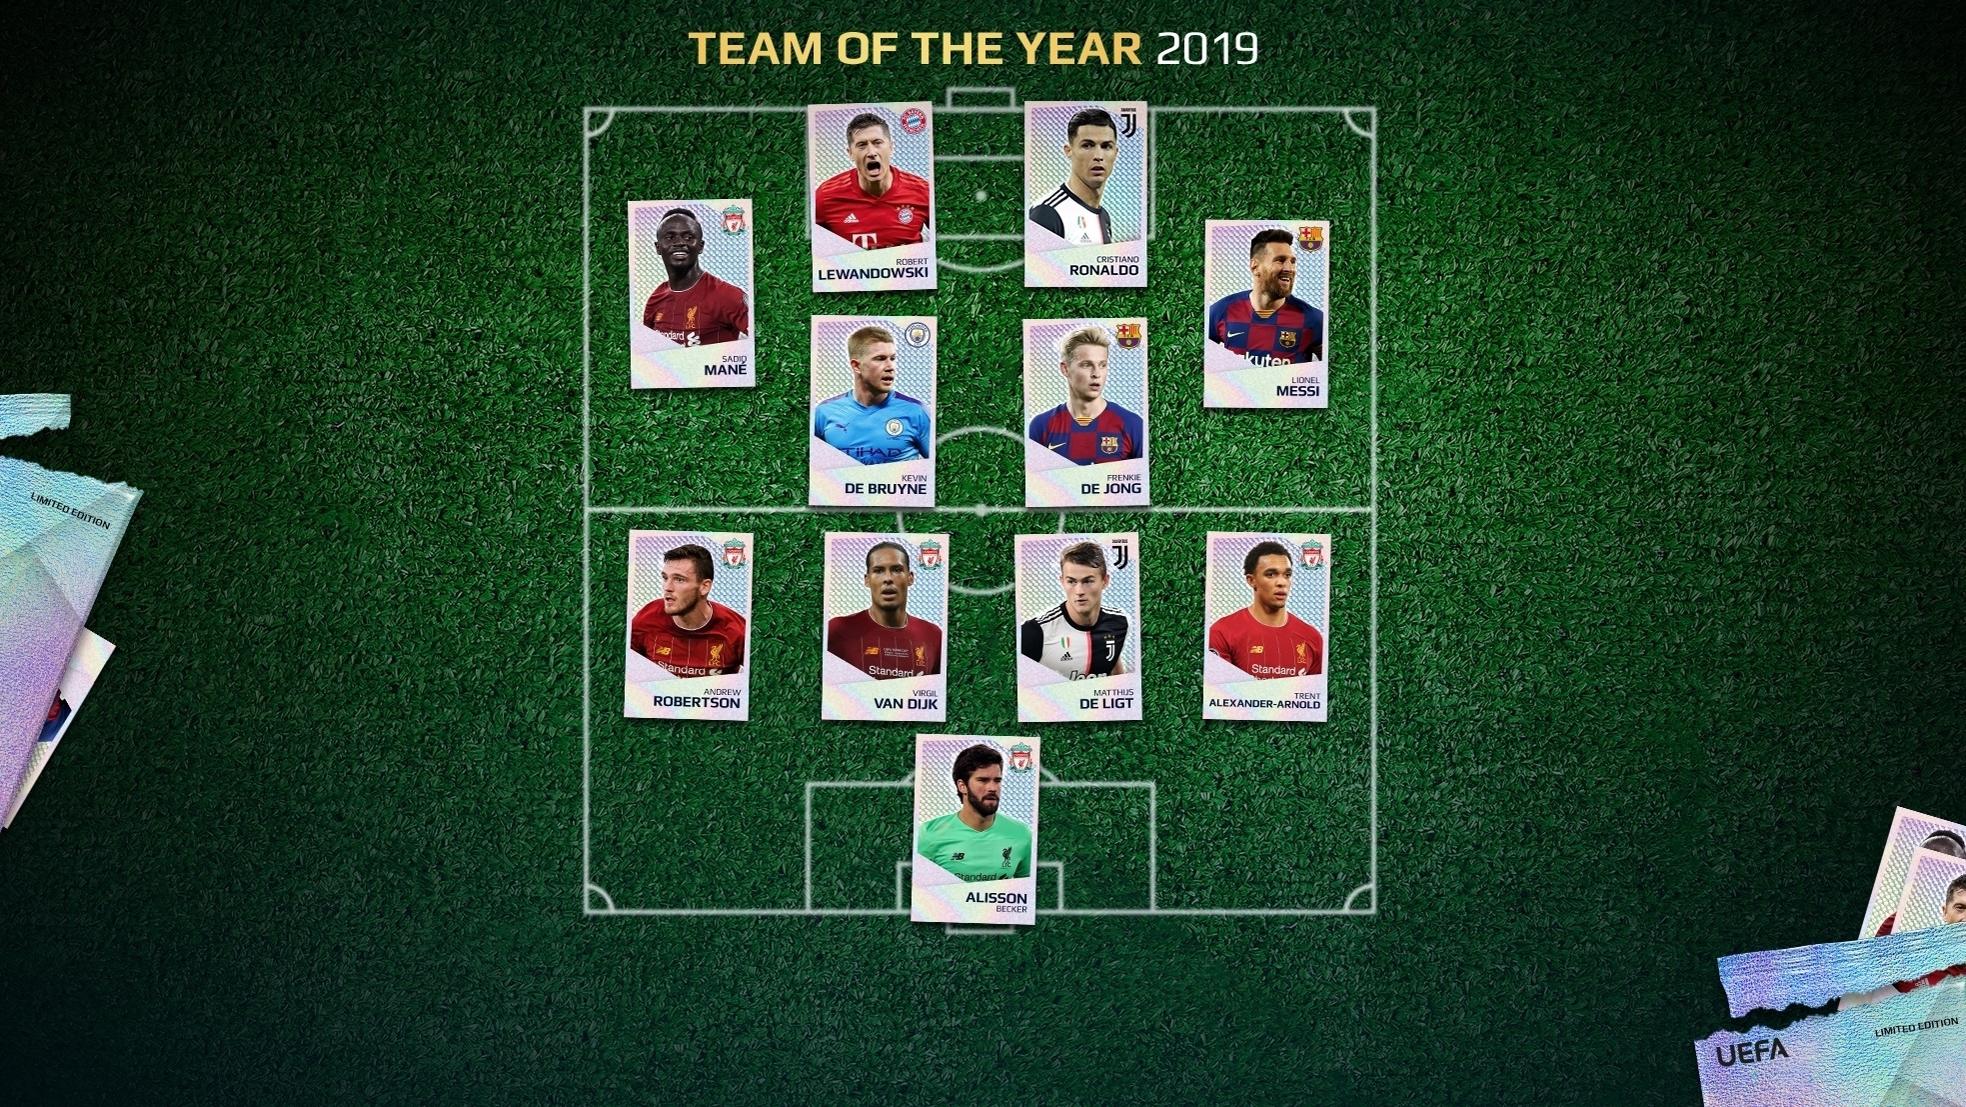 UEFA.com Fans' Team of the Year 2019 